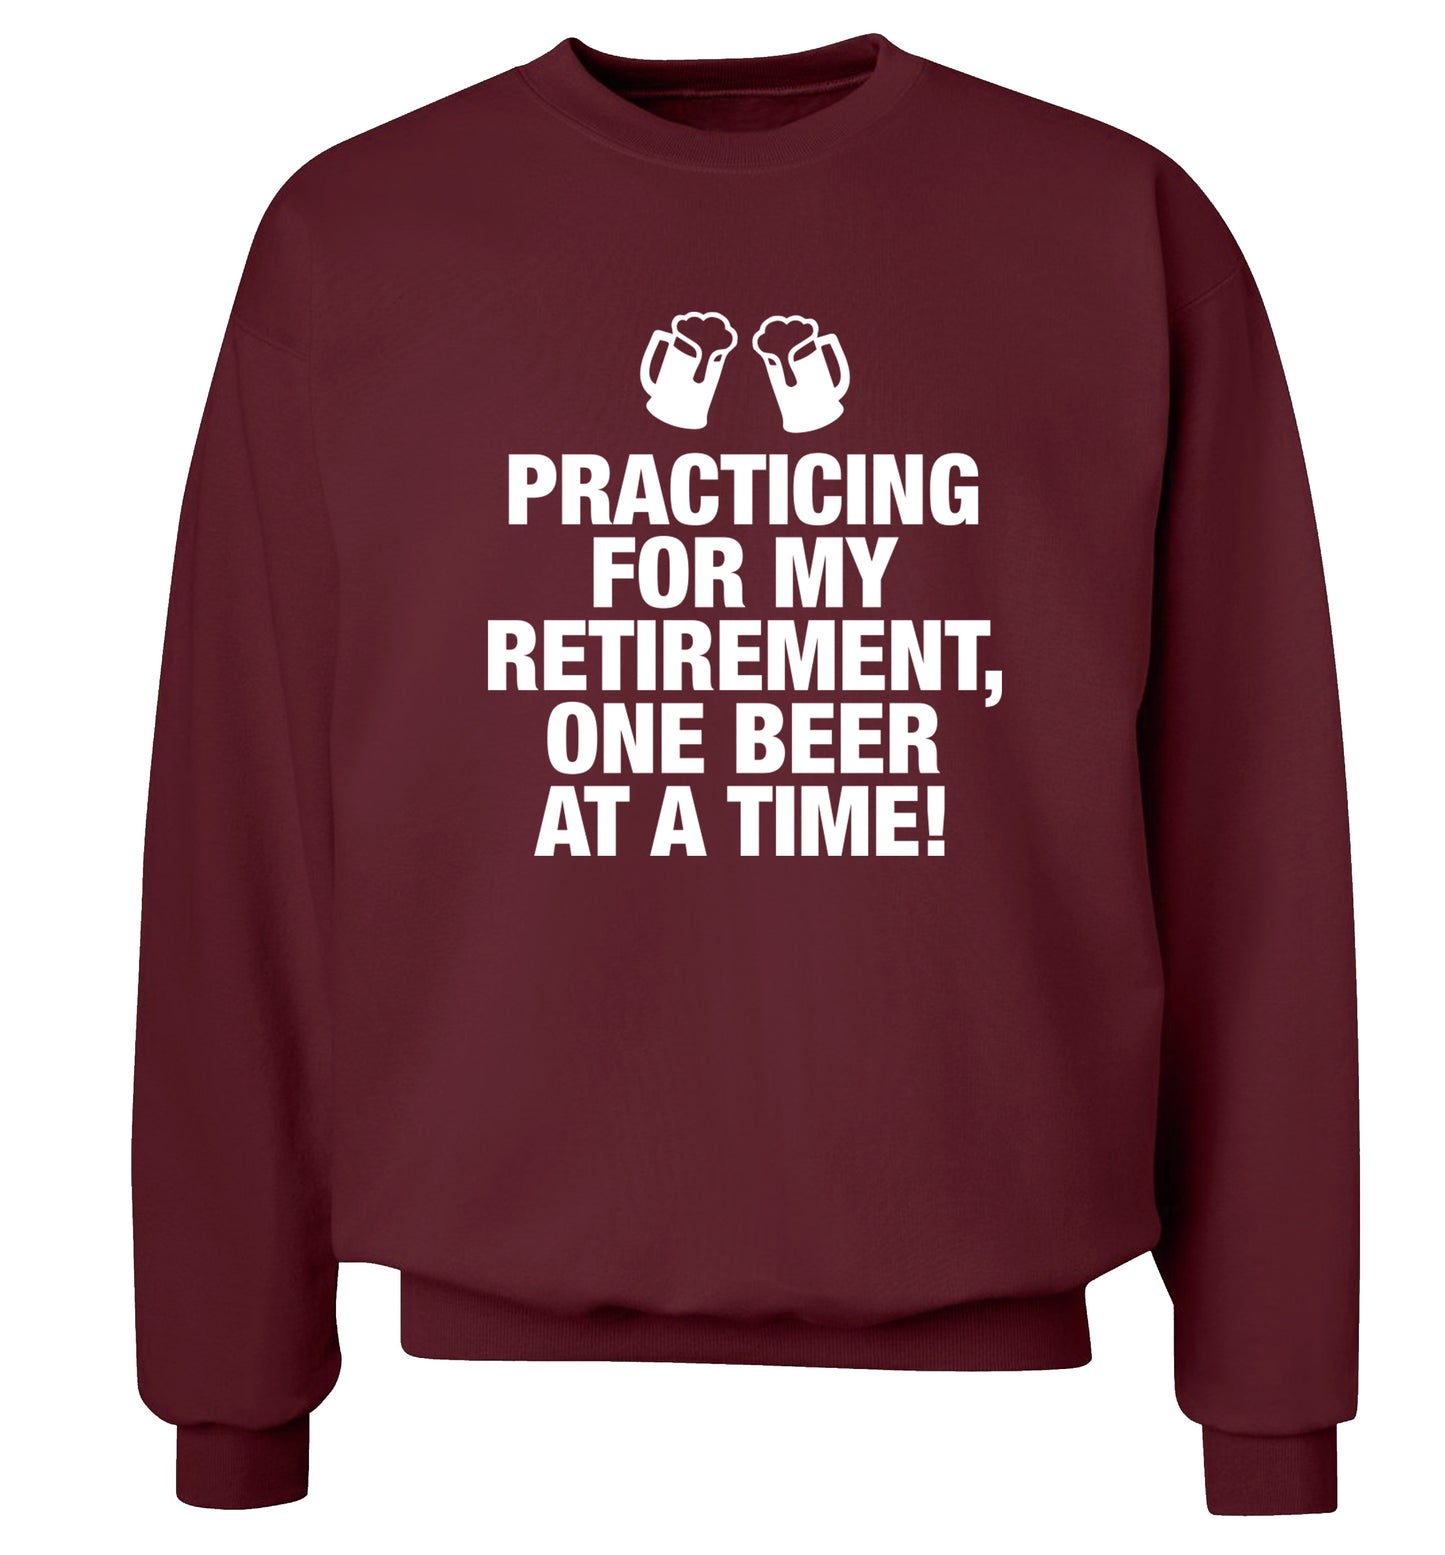 Practicing my retirement one beer at a time Adult's unisex maroon Sweater 2XL